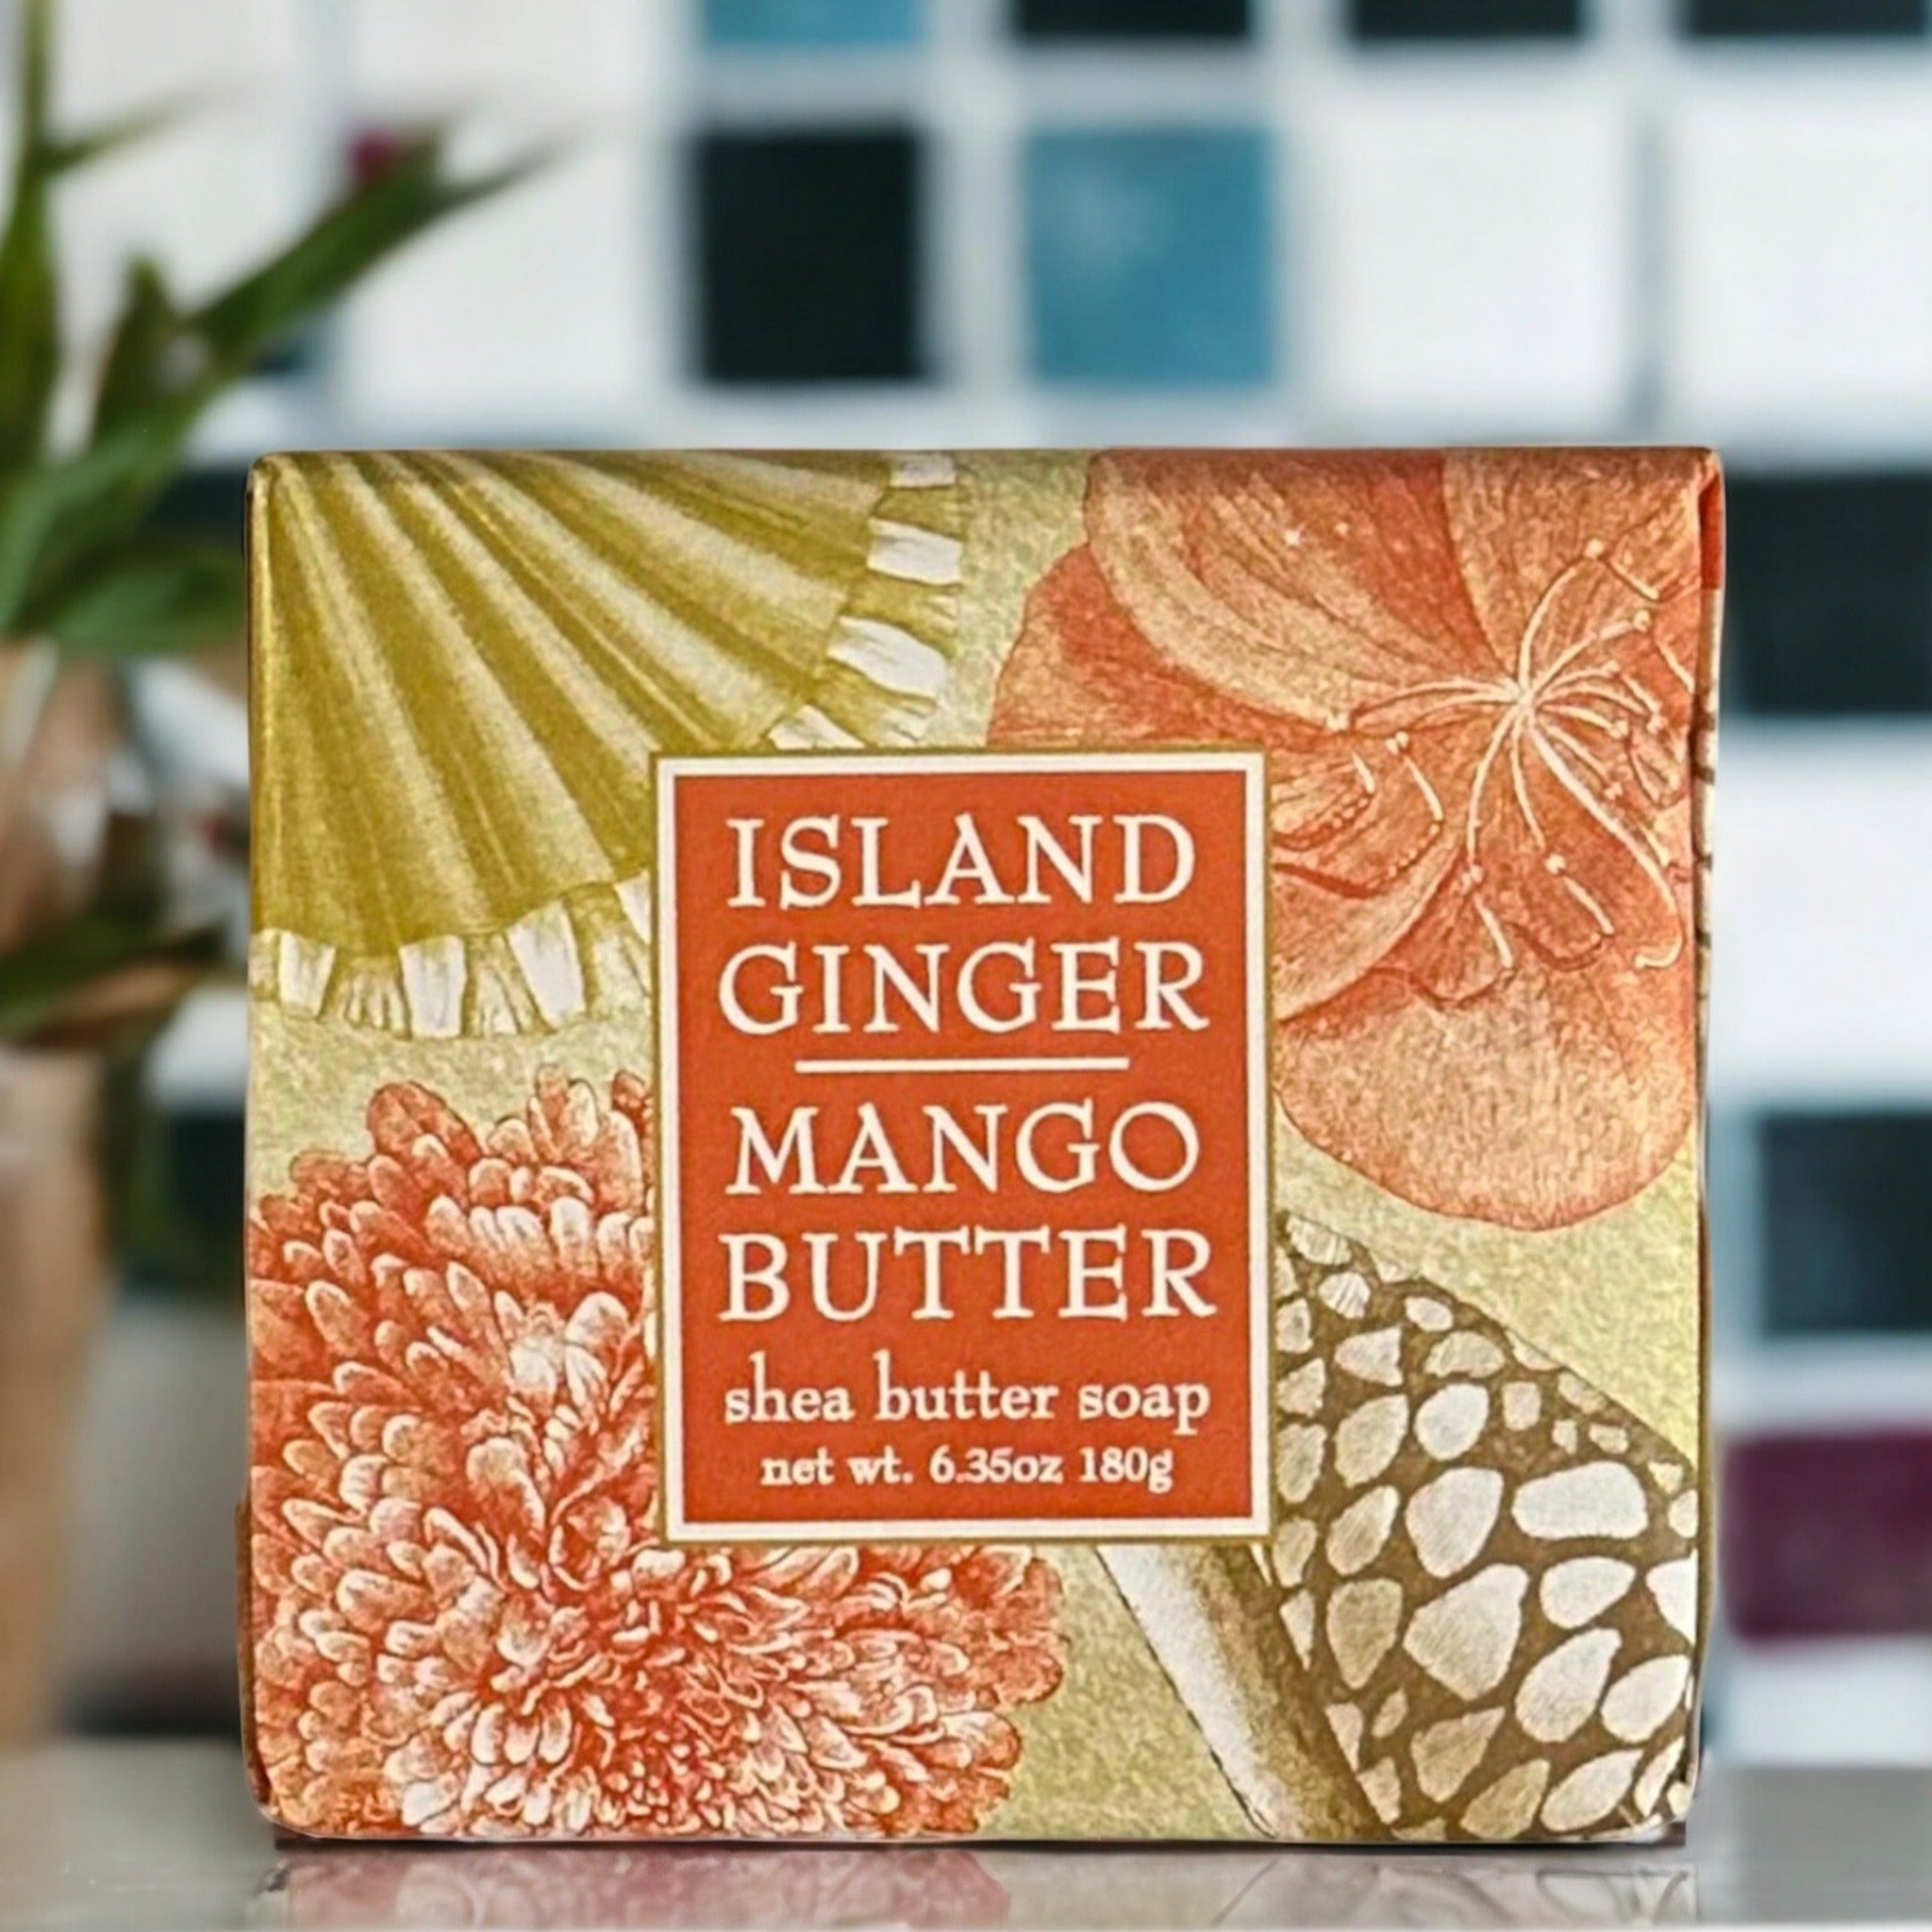 Greenwich Bay Trading Company Island Ginger and Mango Butter Soap 